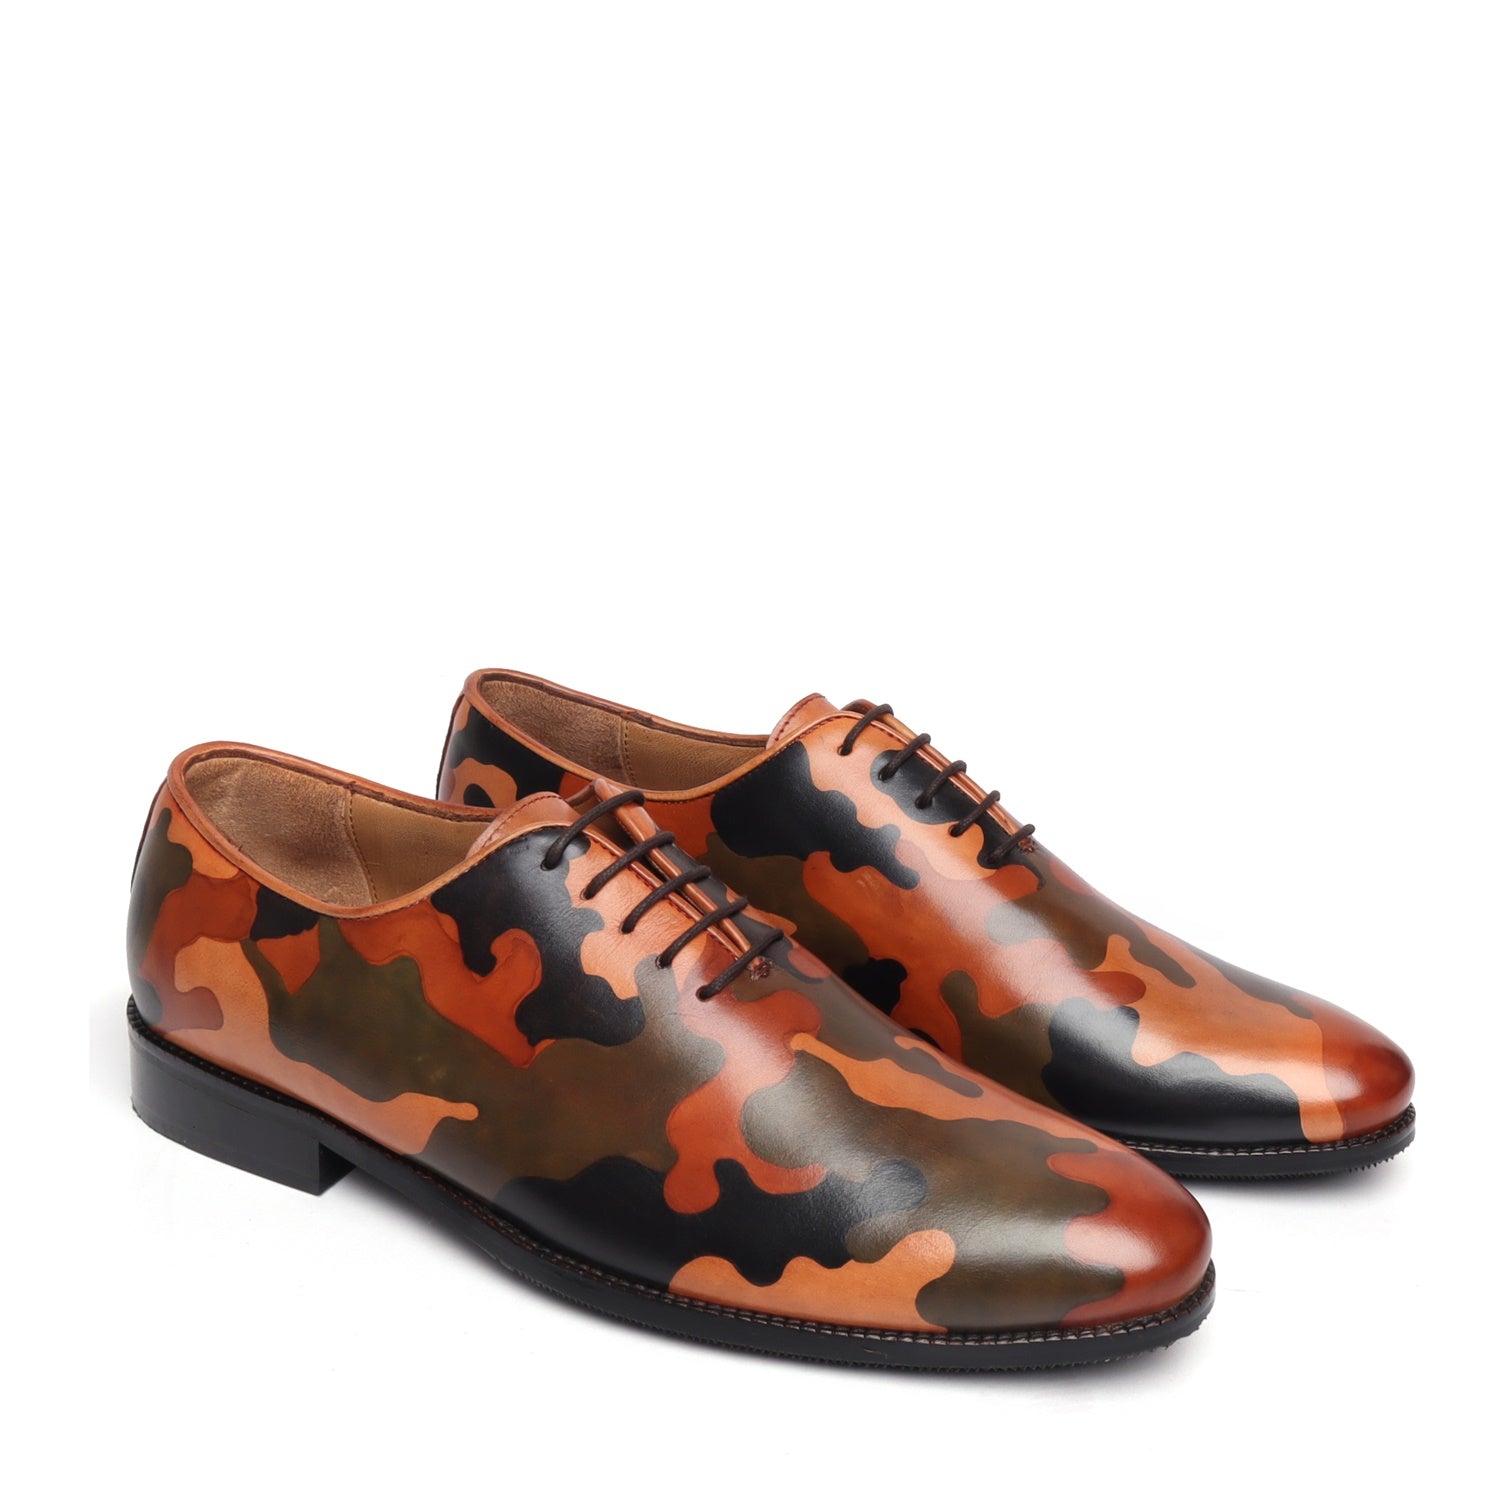 Hand painted ARMY colors on leather one piece(whole cut) brogue shoe By Brune & Bareskin